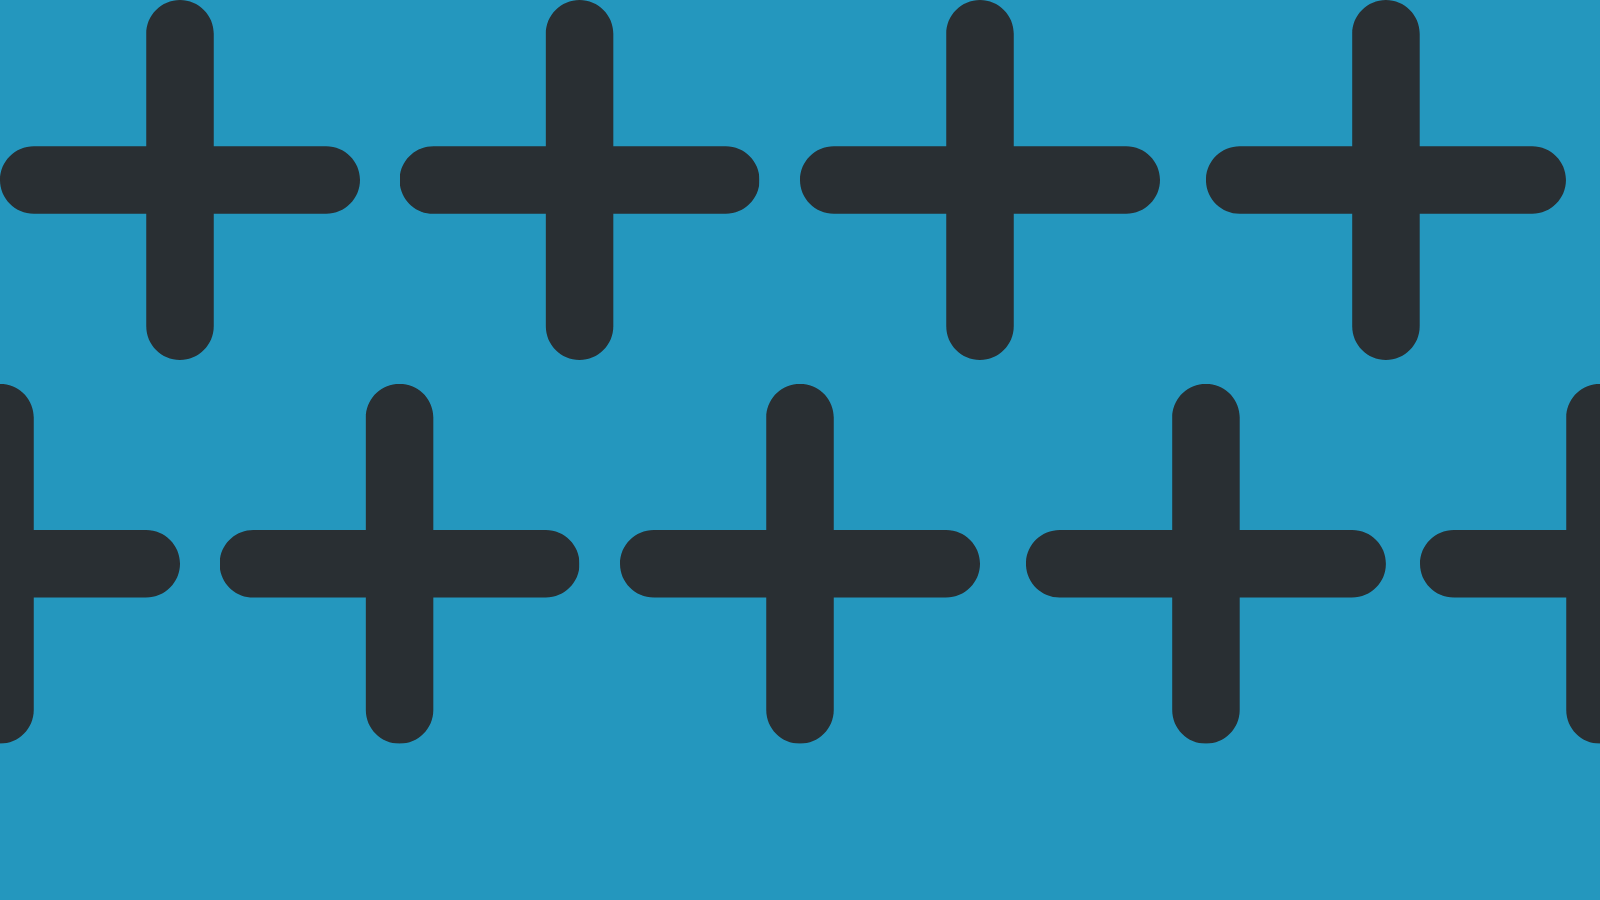 A repeating pattern of Plus Signs